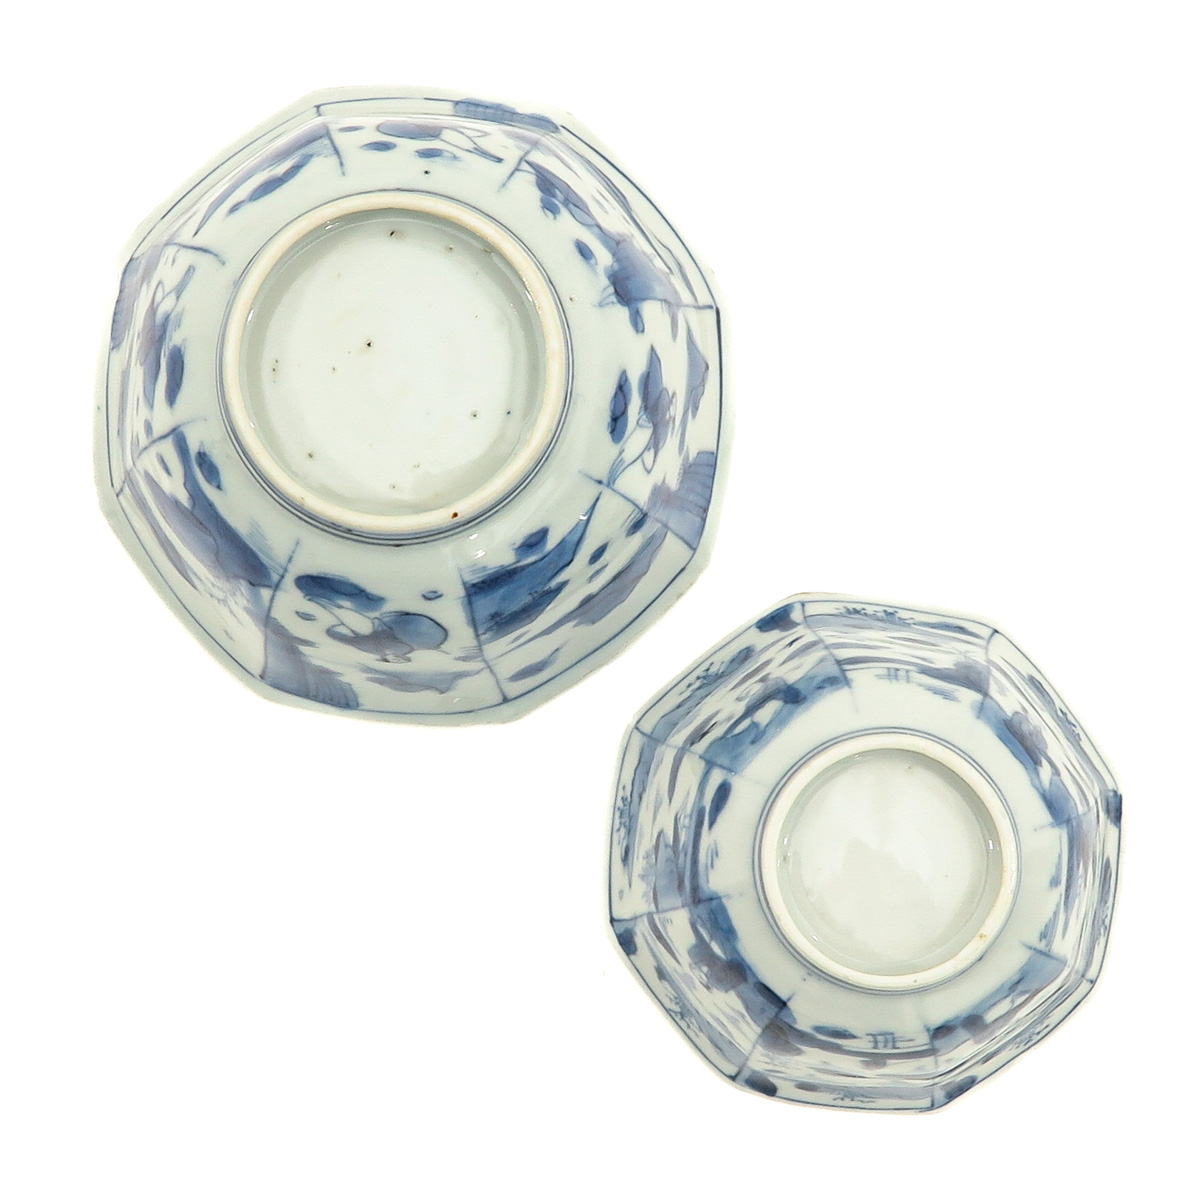 A Lot of 2 Blue and White Cups - Image 6 of 10